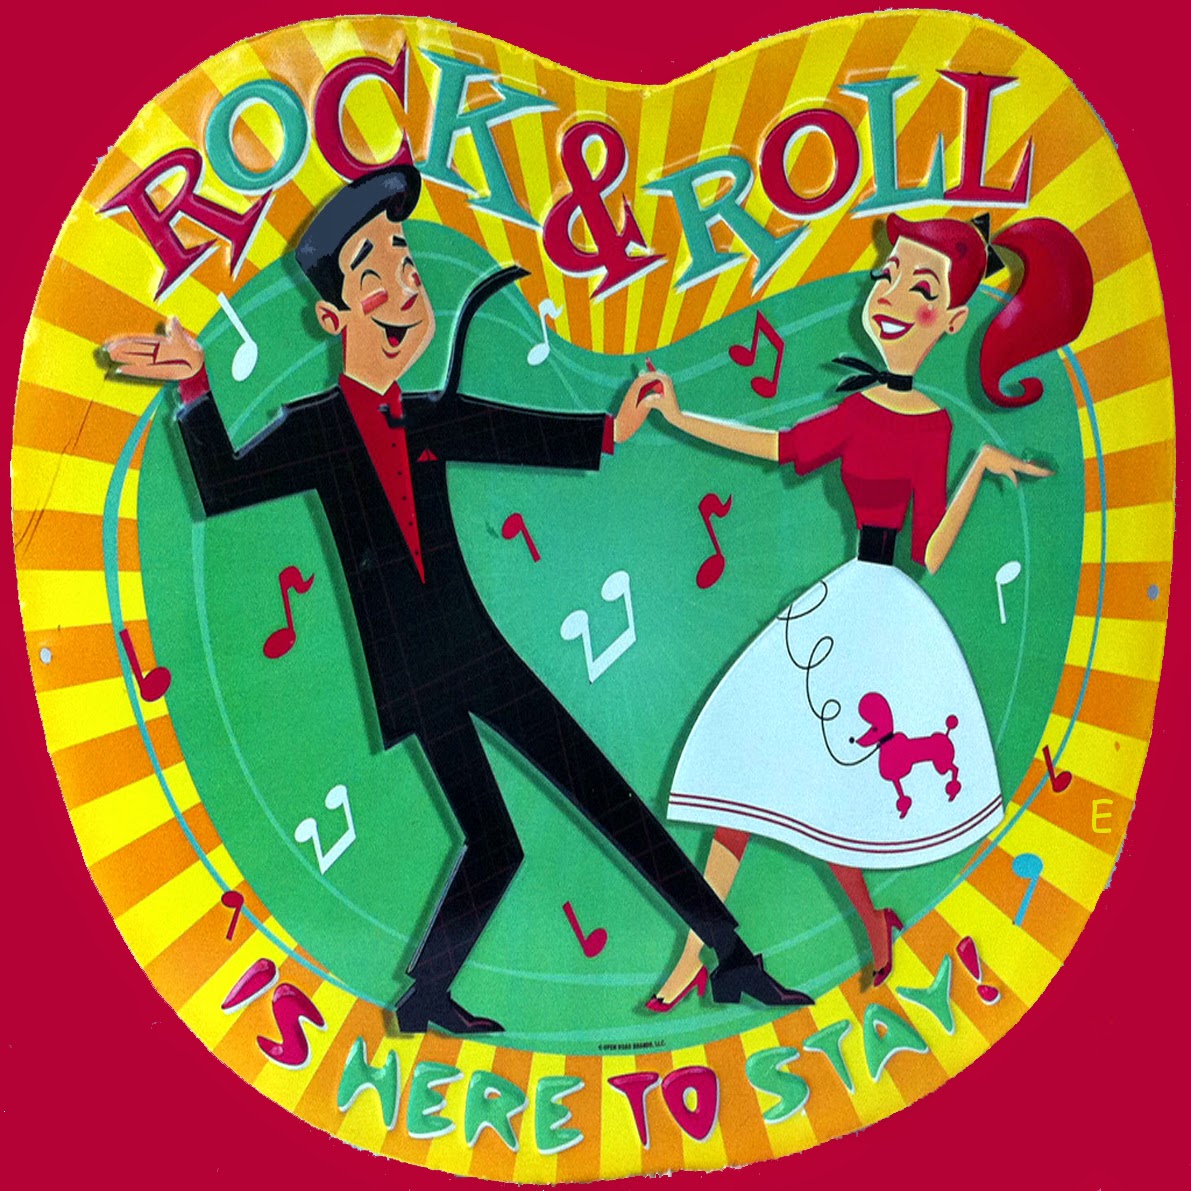 Rock And Roll Revival Rock & Roll Is Here To Stay!